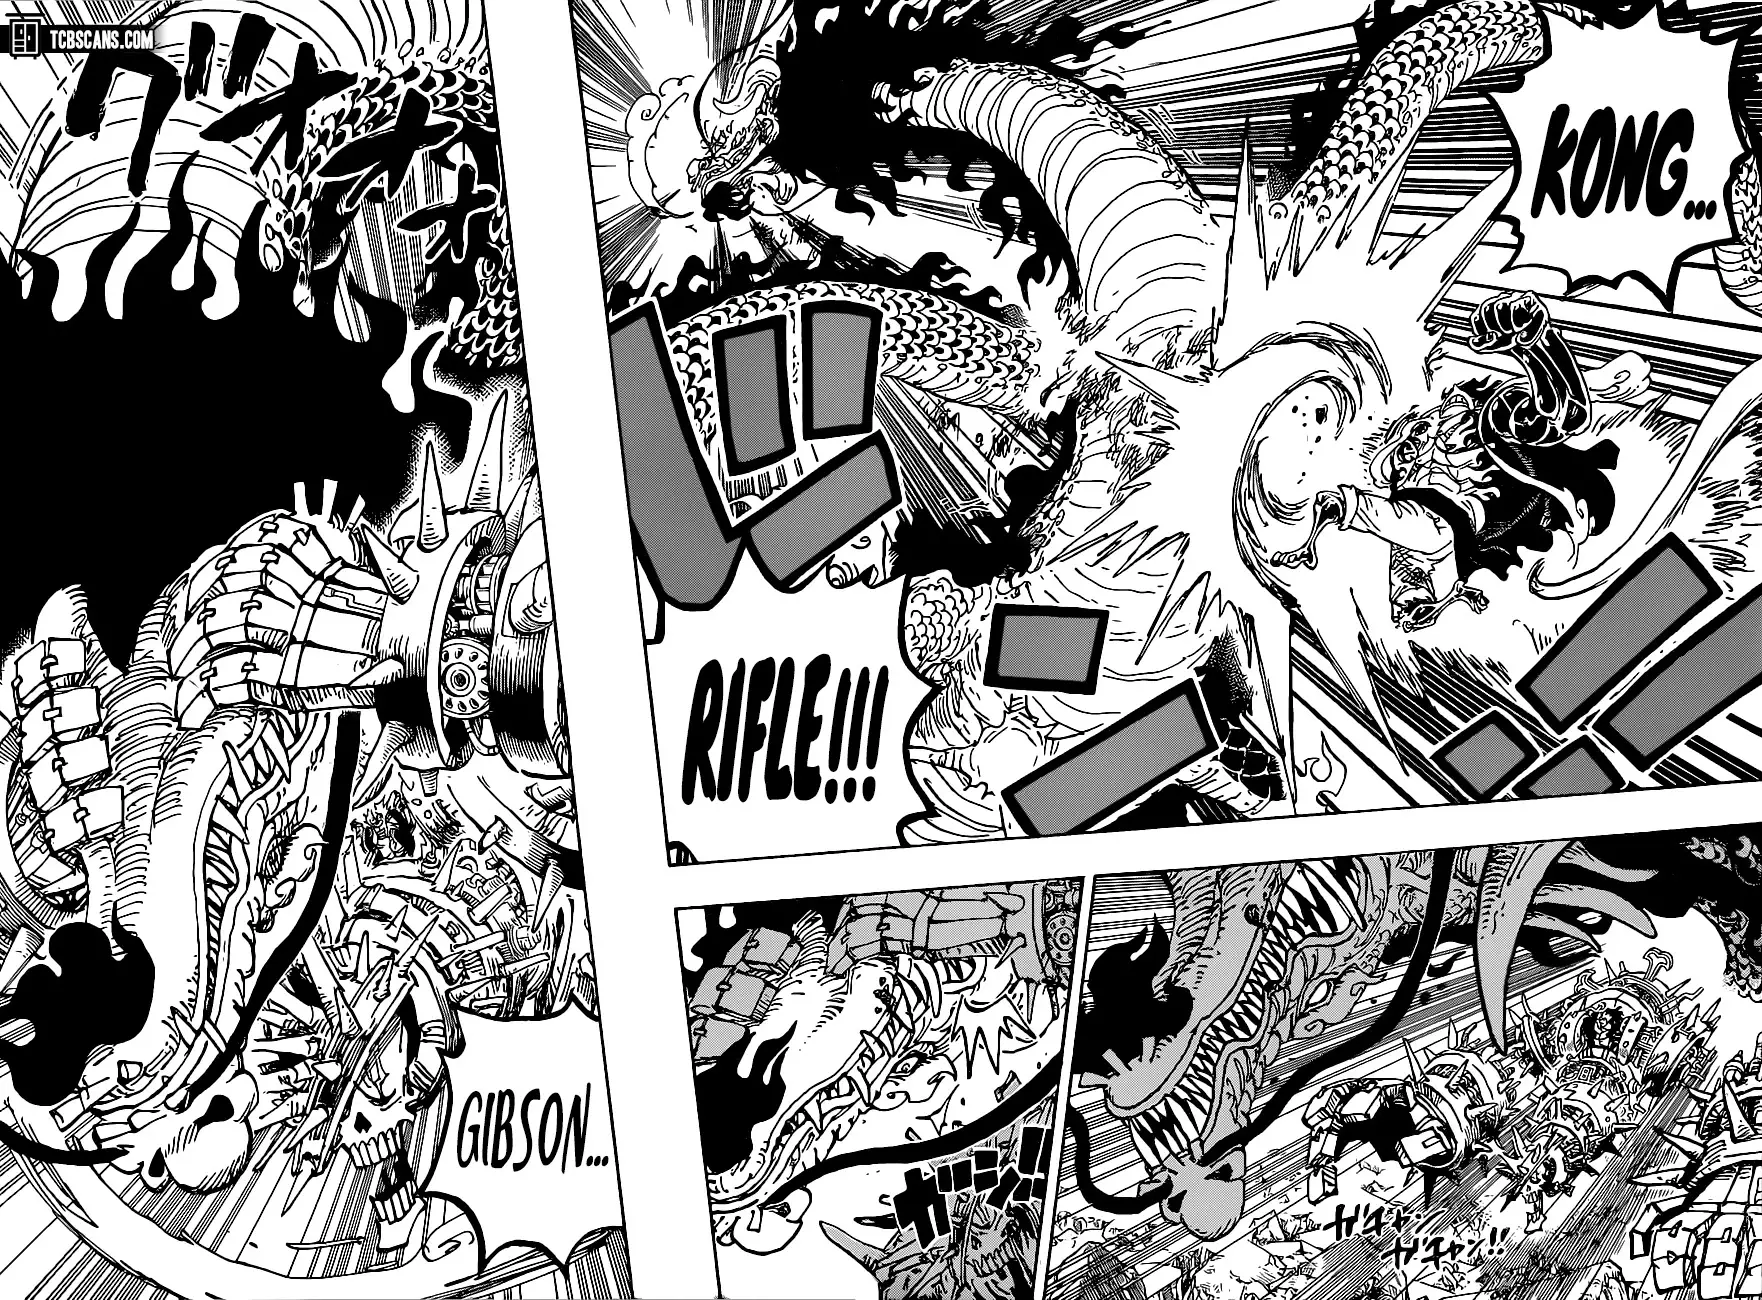 One Piece - 1002 page 5-7461c560